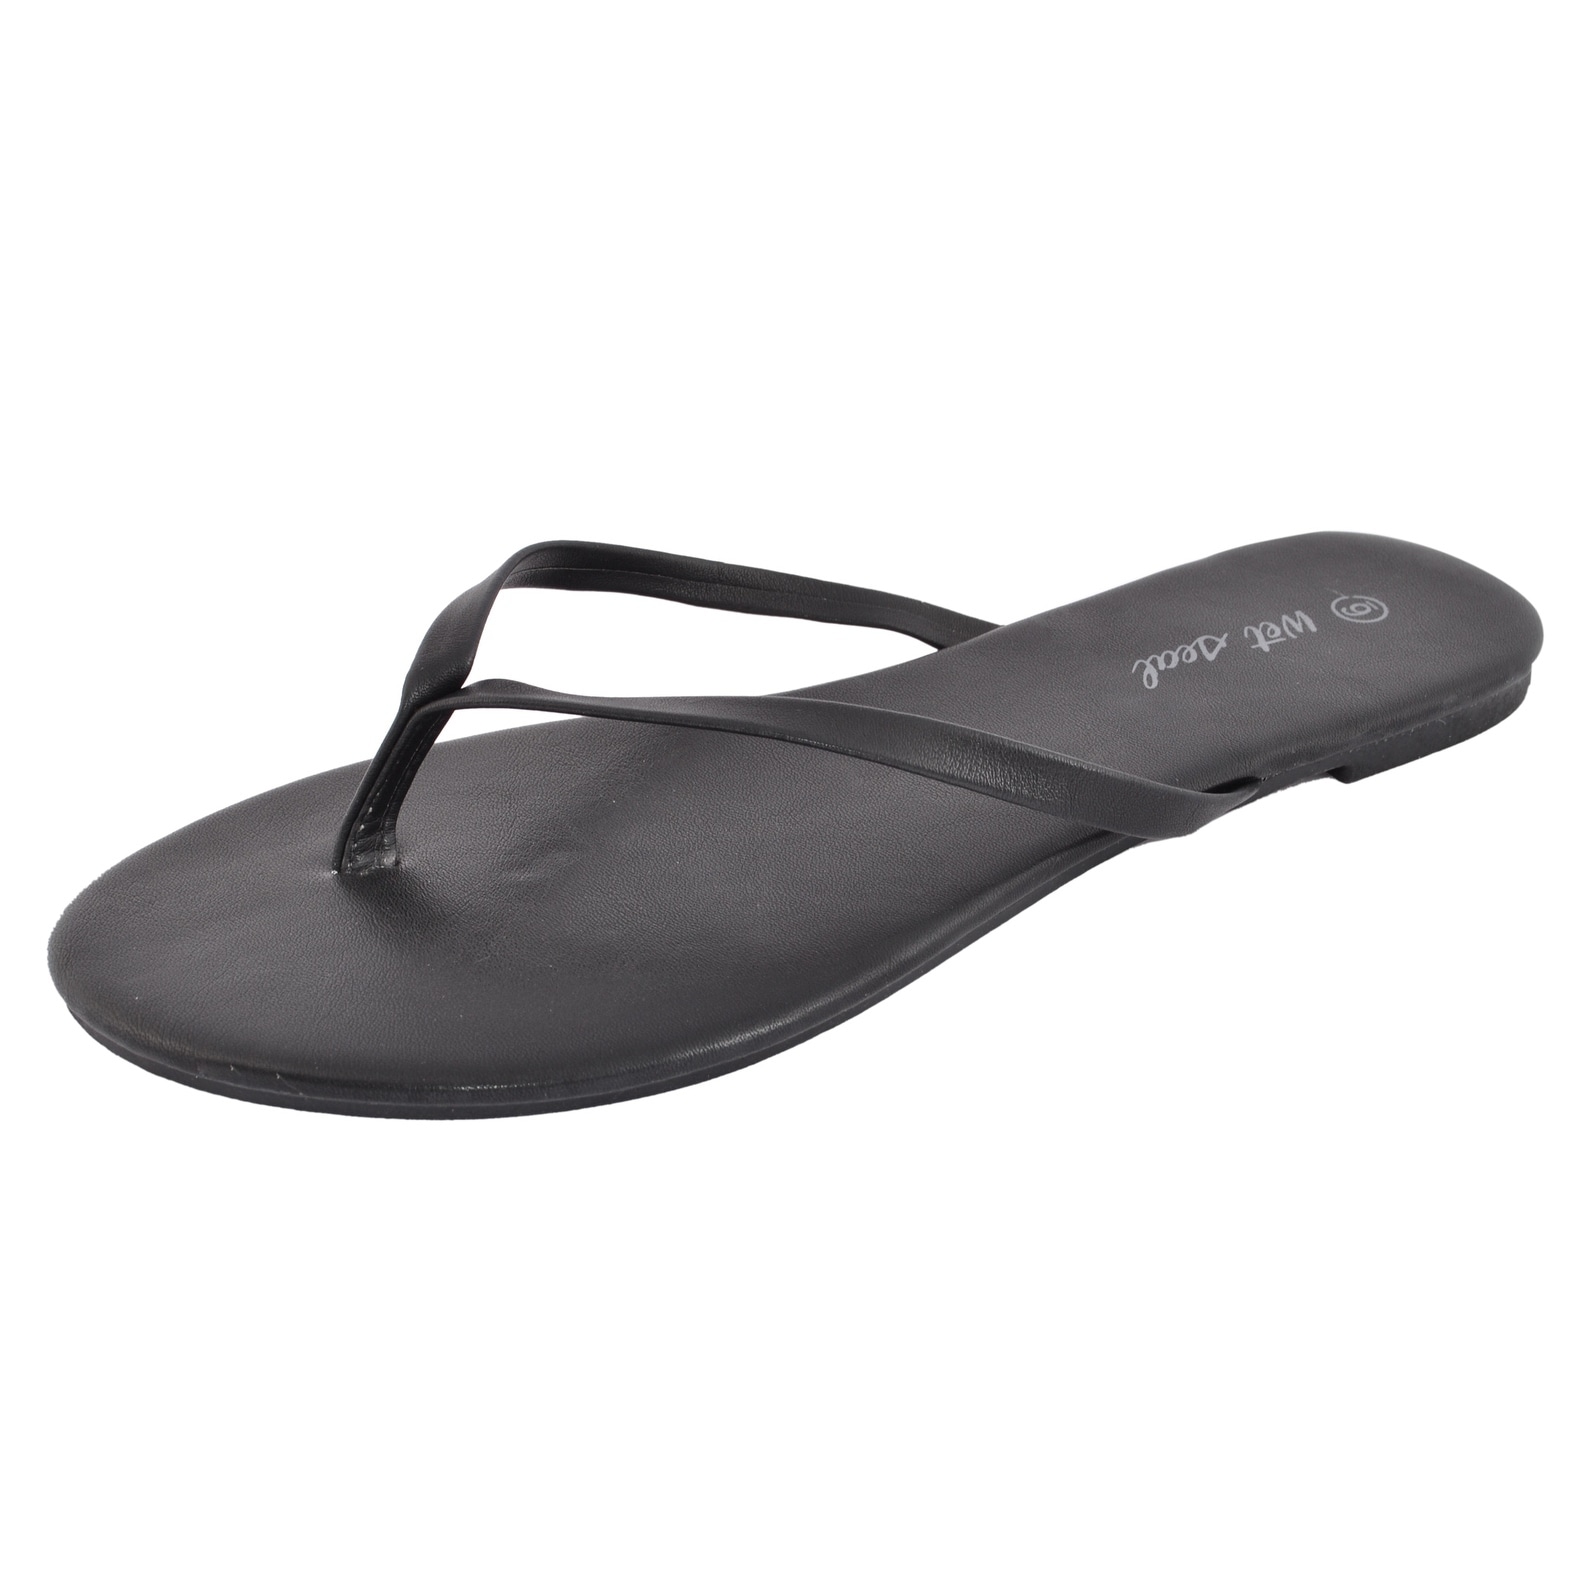 faux leather thong sandals